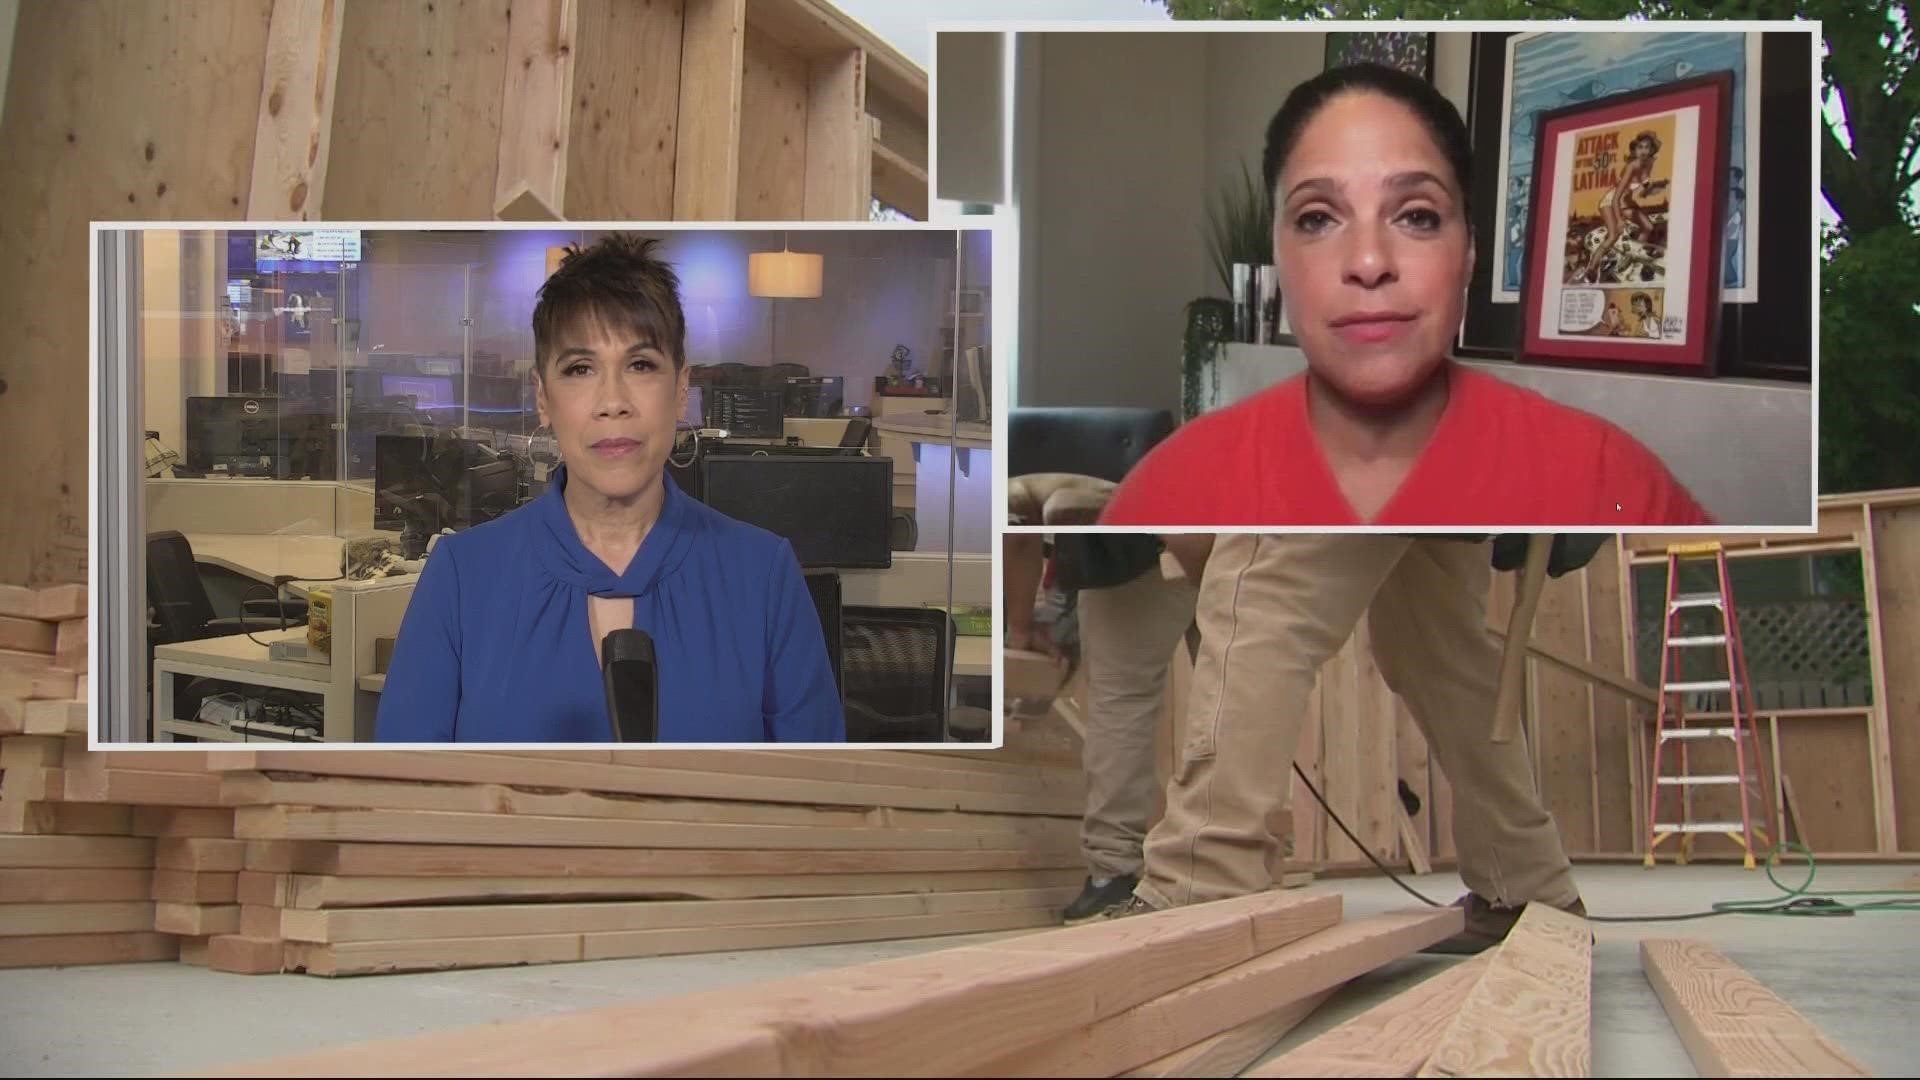 Habitat for Humanity will hold a virtual fundraiser on Wednesday, April 27. KGW Sunrise's Brenda Braxton talked to the keynote speaker, journalist Soledad O'Brien.